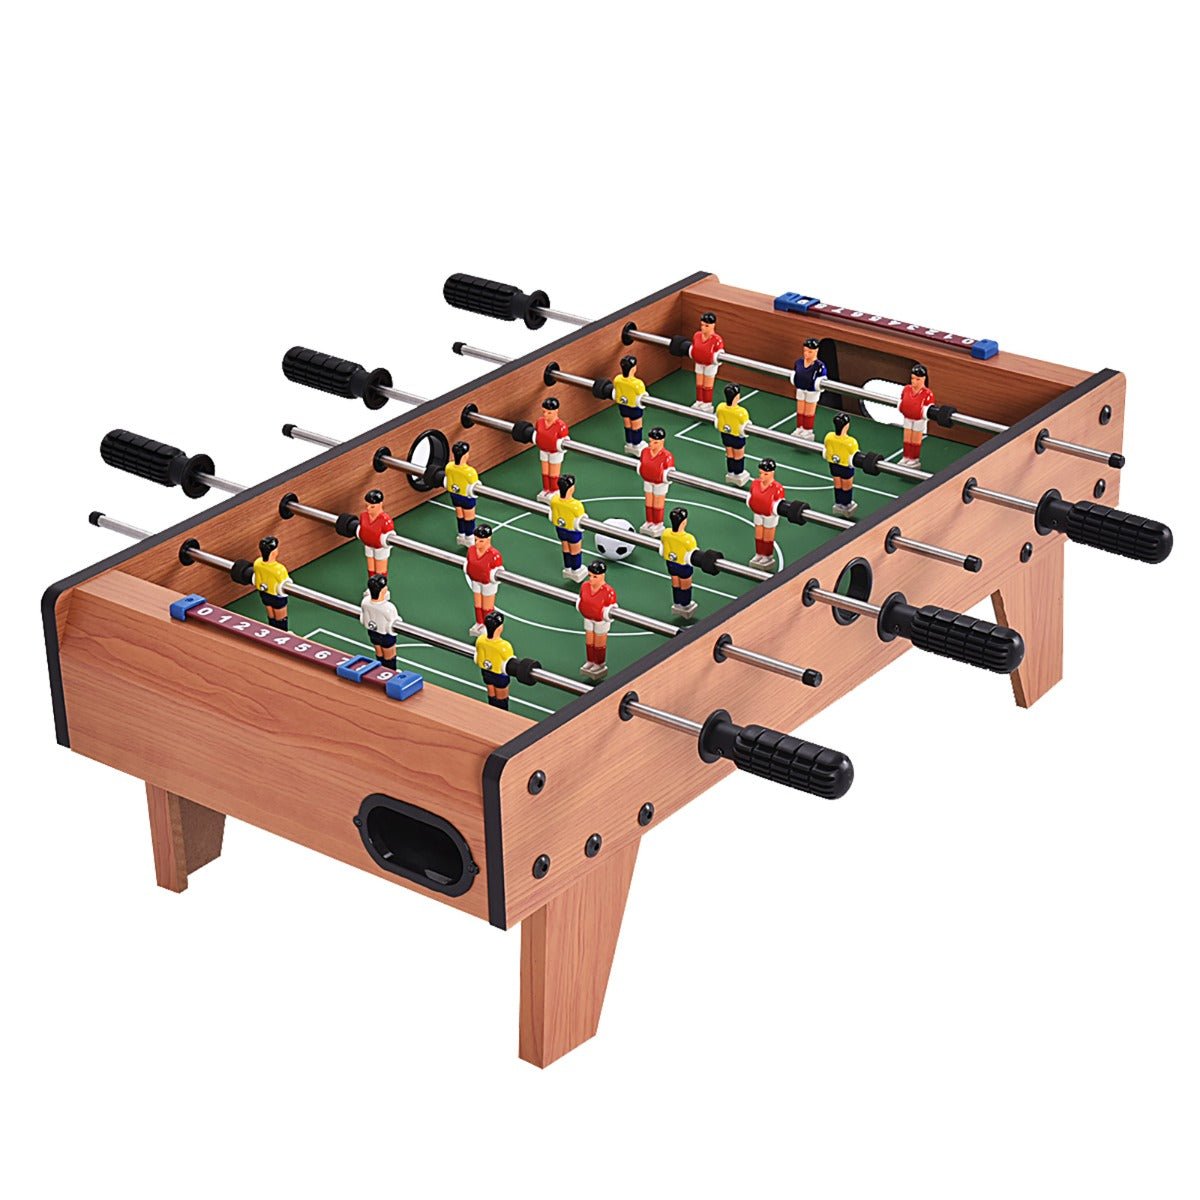 Score Big and Have Fun with Tabletop Foosball - Buy Today!